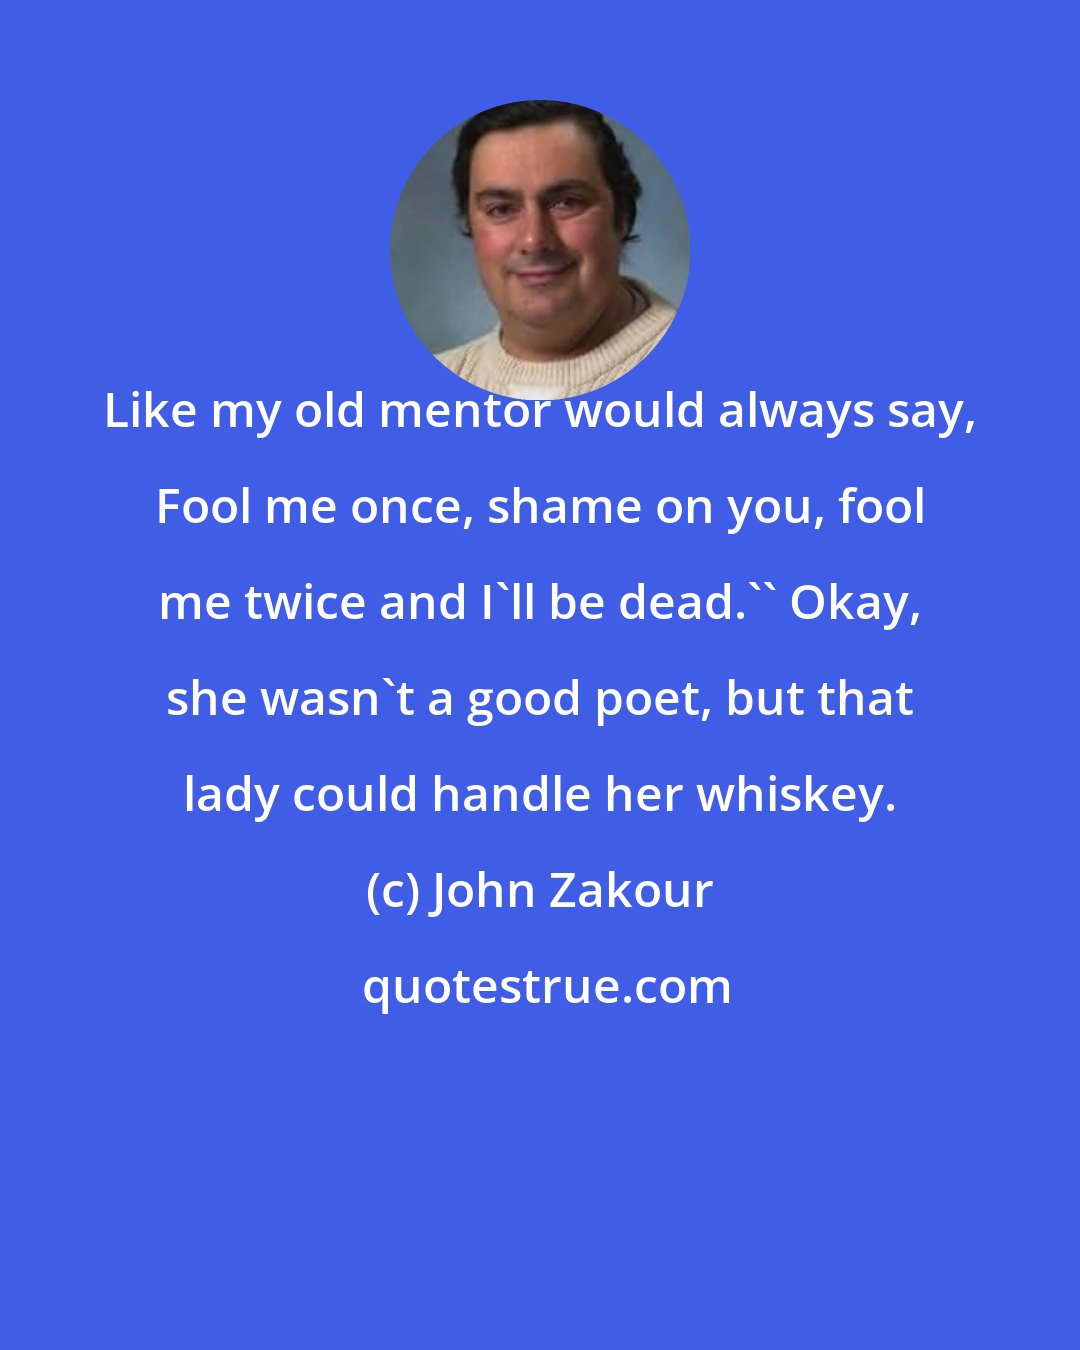 John Zakour: Like my old mentor would always say, Fool me once, shame on you, fool me twice and I'll be dead.'' Okay, she wasn't a good poet, but that lady could handle her whiskey.